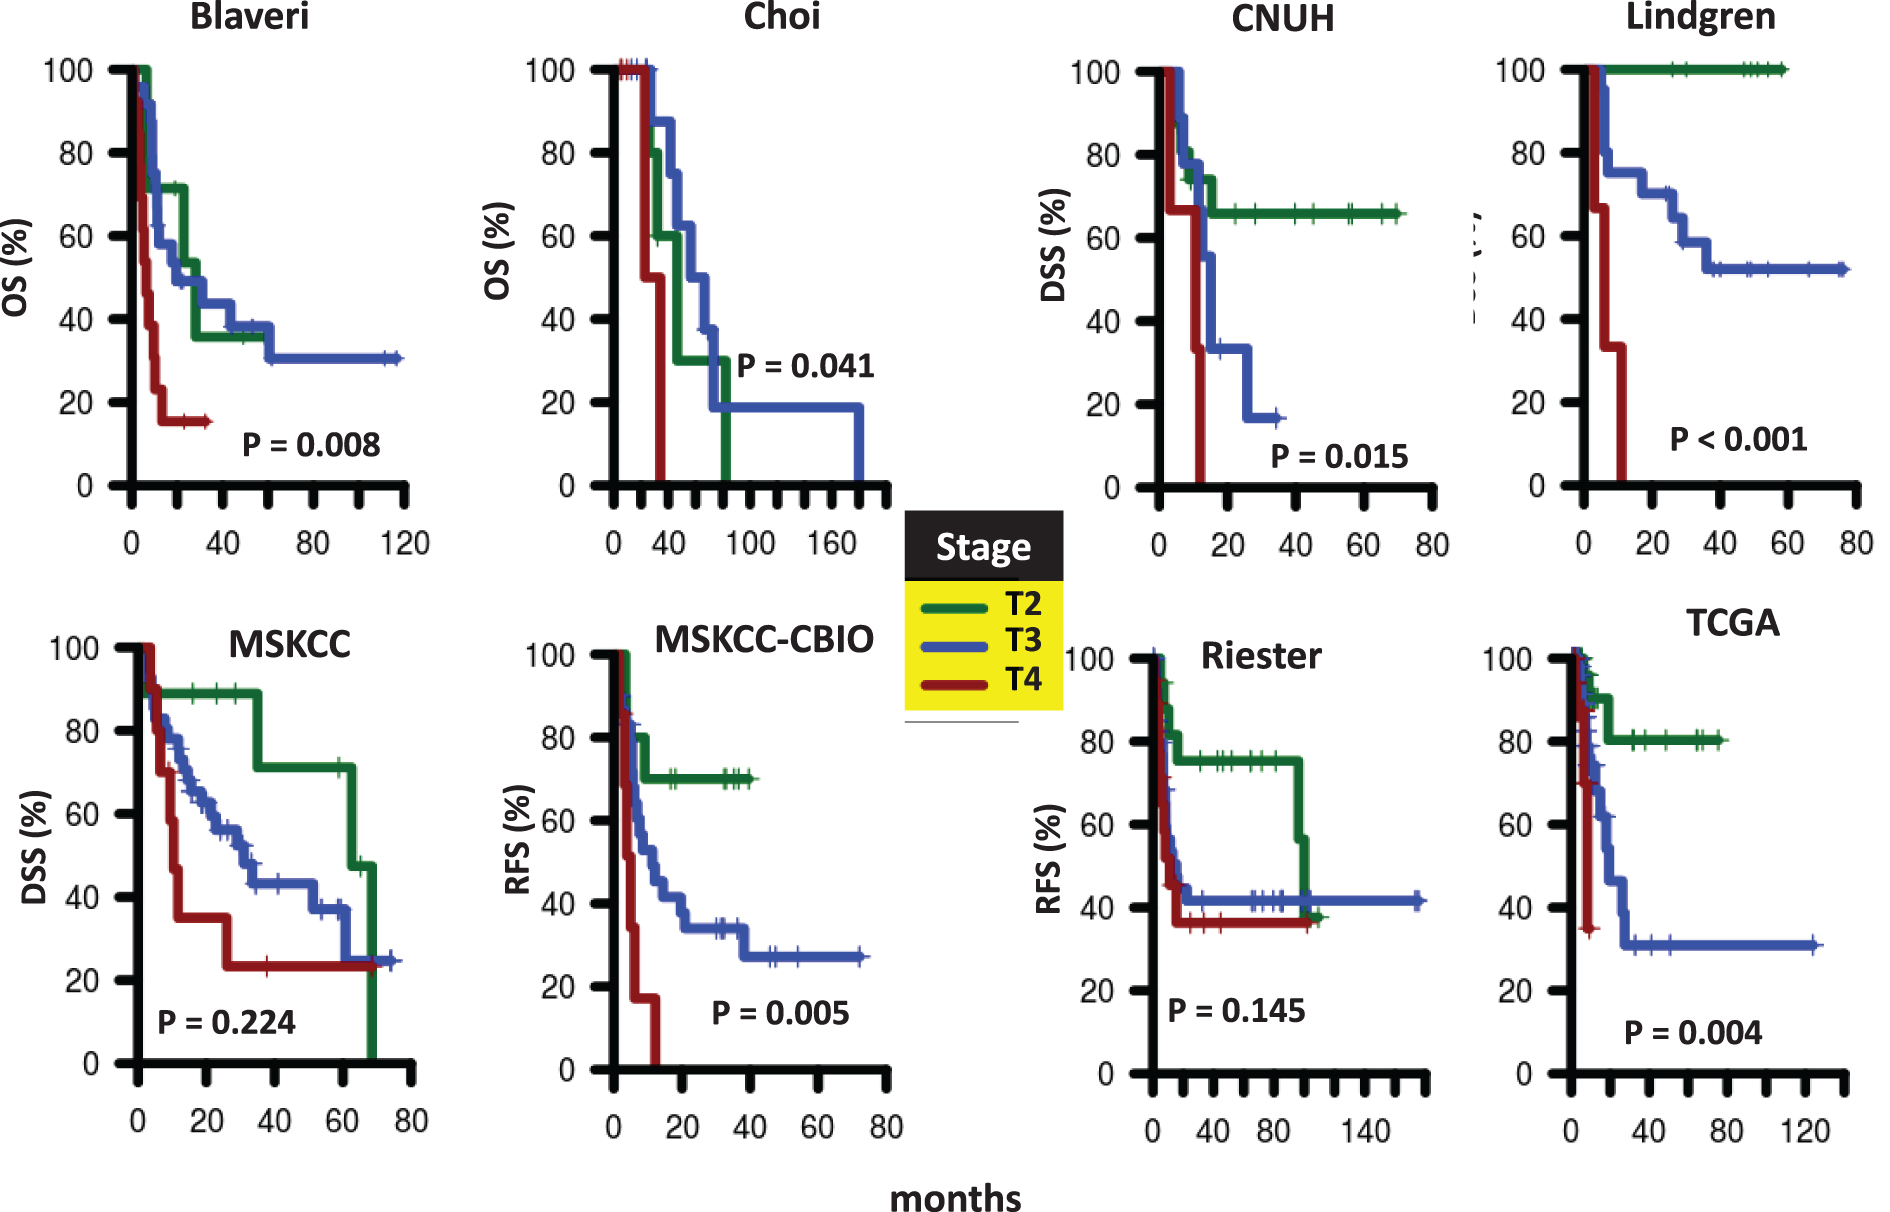 
          Survival of patients according to tumor stage. Kaplan-Meier curves were generated for patients with T2 (green), T3 (blue), and T4 (red) tumors in Blaveri (N = 44), Choi (N = 22), CNUH (N = 28), Lindgren (N = 32), MSKCC (N = 60), MSKCC-CBIO (N = 47), Riester (N = 78), and TCGA (N = 147) cohorts. The log-rank P value is reported. Abbreviations: DSS, disease-specific survival; OS, Overall survival; RFS, recurrence-free survival.
        